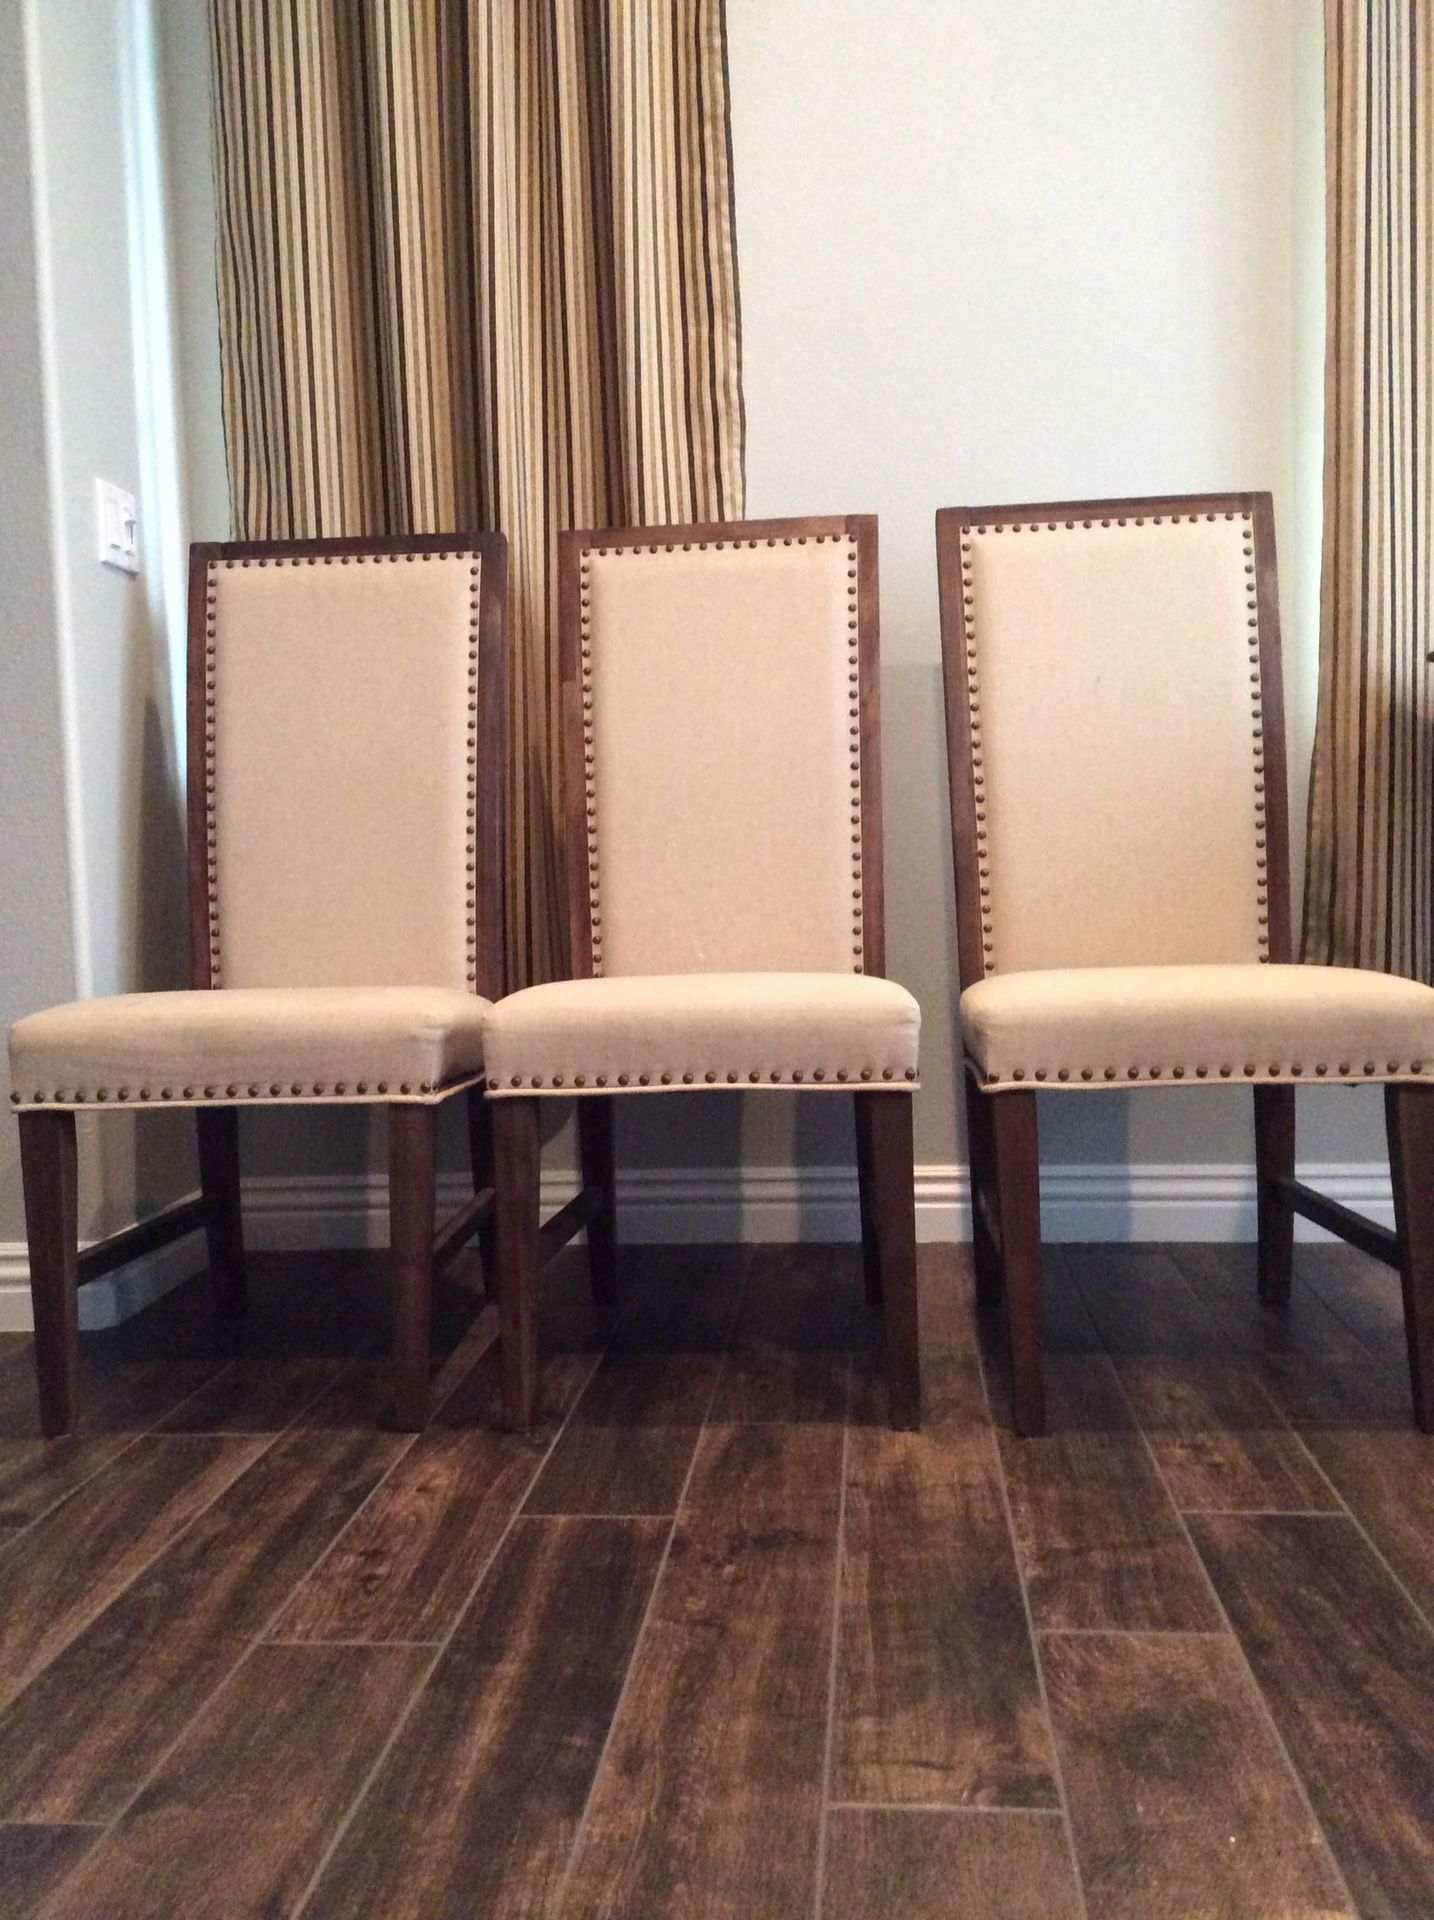 Dining Chairs - $75 for all 3